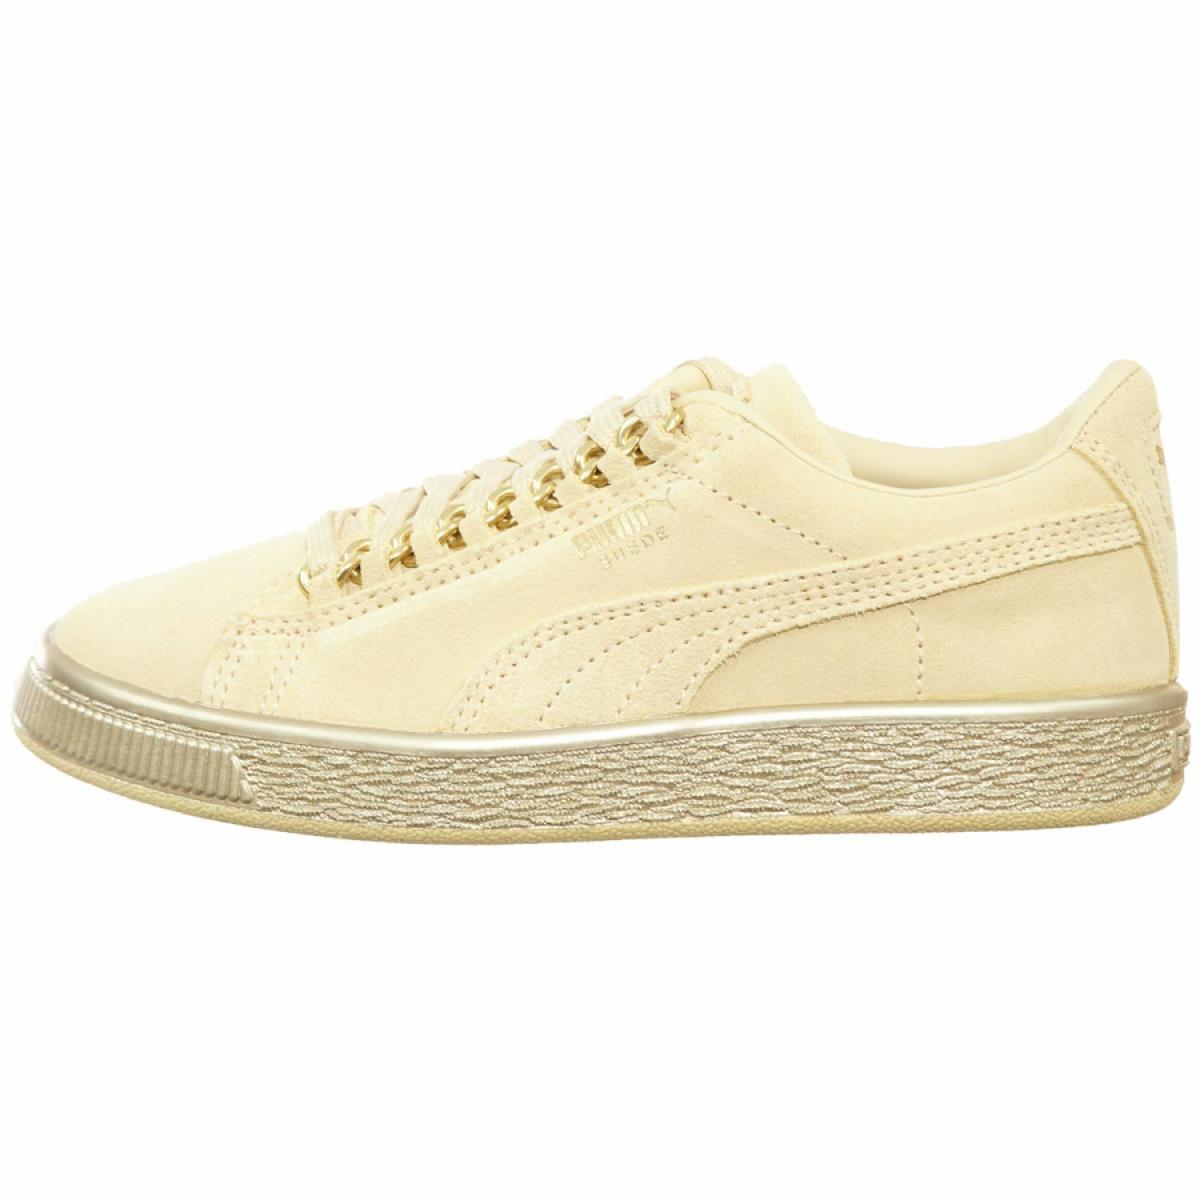 Puma Suede Classic x Chain Little Kids 366666-02 Yellow Shoes Youth Size 3